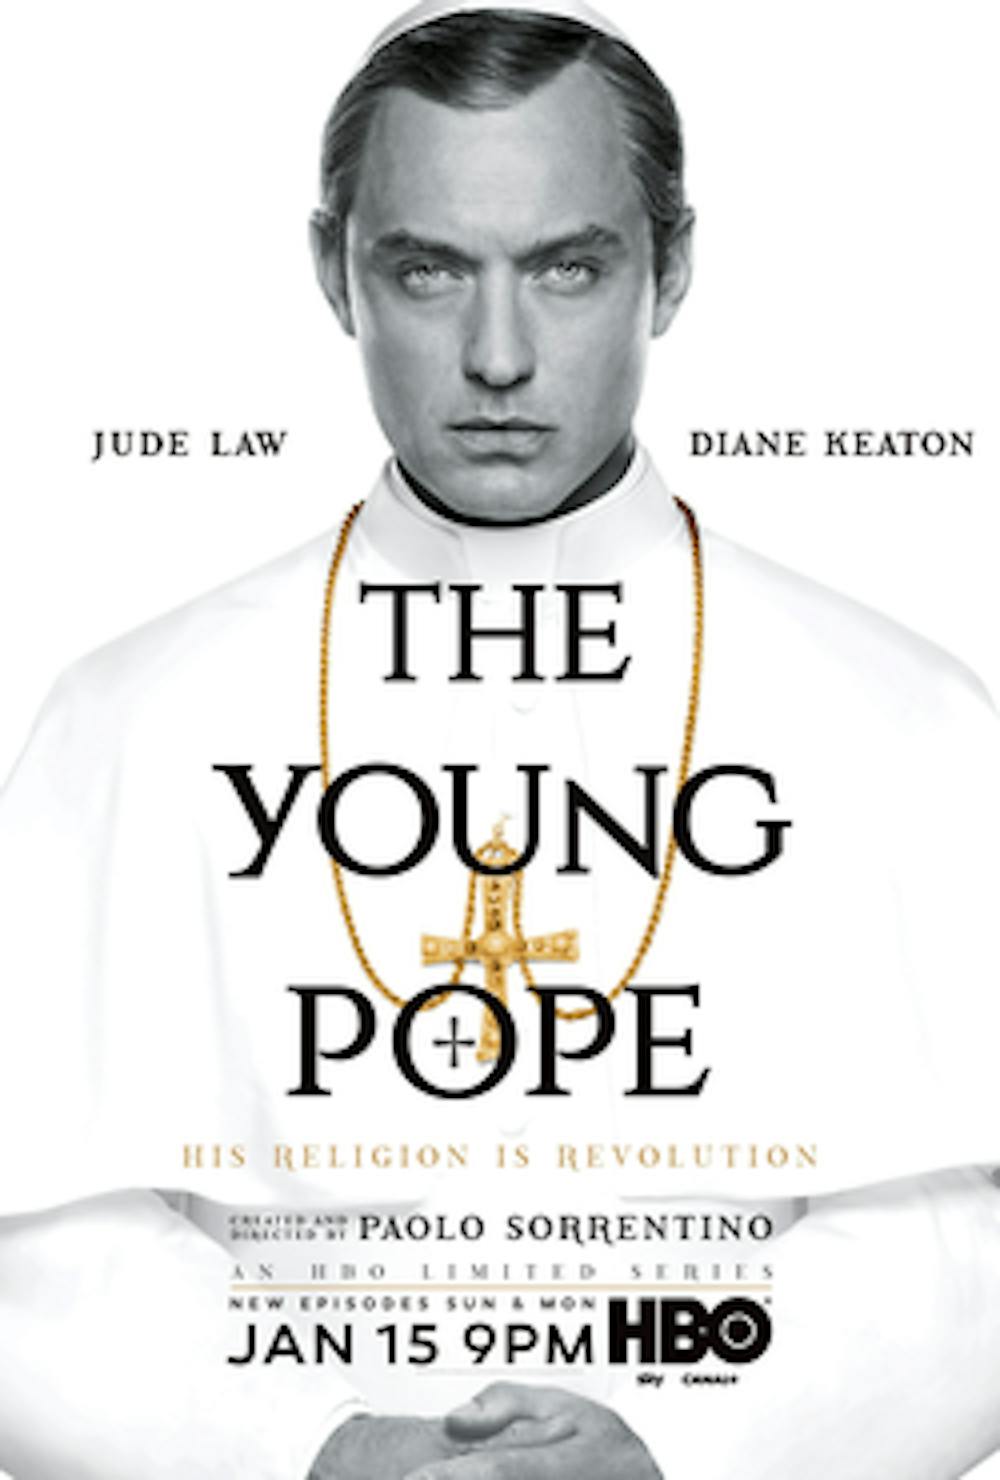 The Young Pope, episodes 1-5: Paolo Sorrentino’s HBO mini-series explores the Vatican like it never has been before